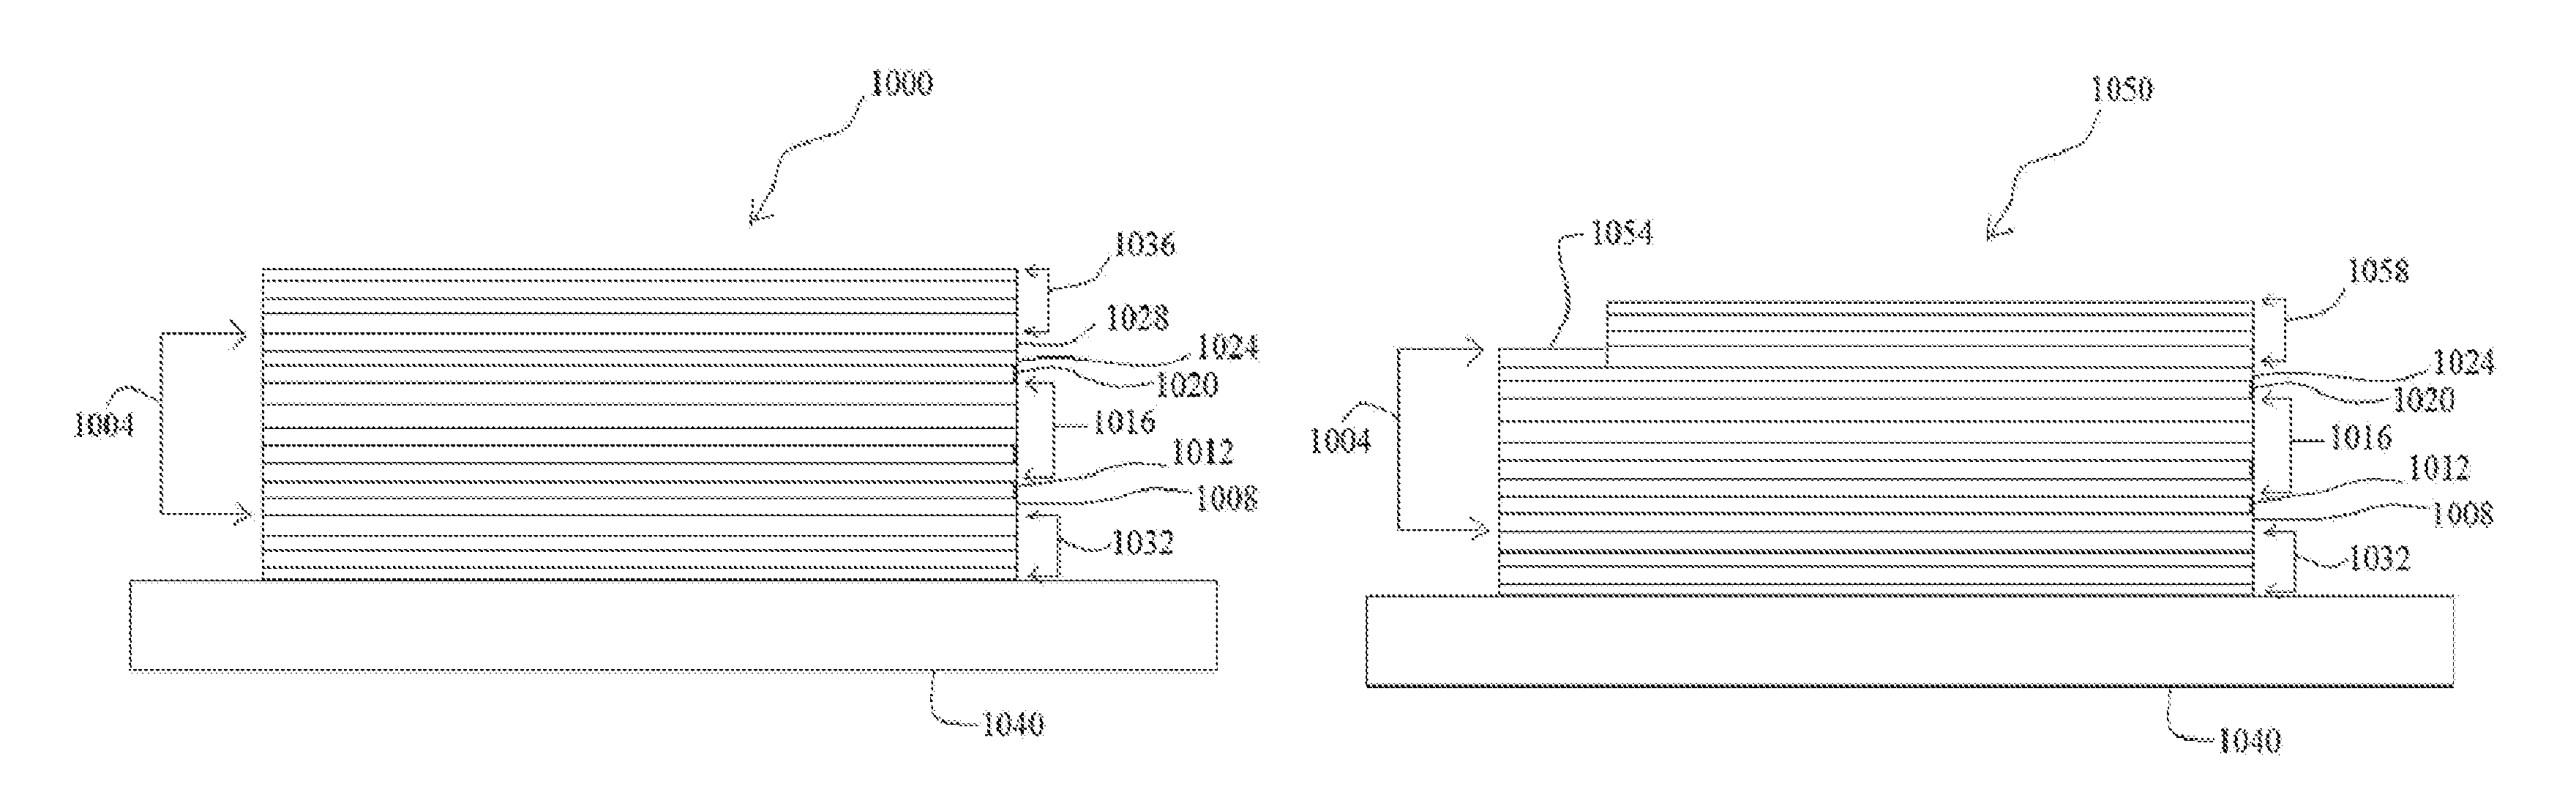 Optoelectronic device containing at least one active device layer having a wurtzite crystal structure, and methods of making same